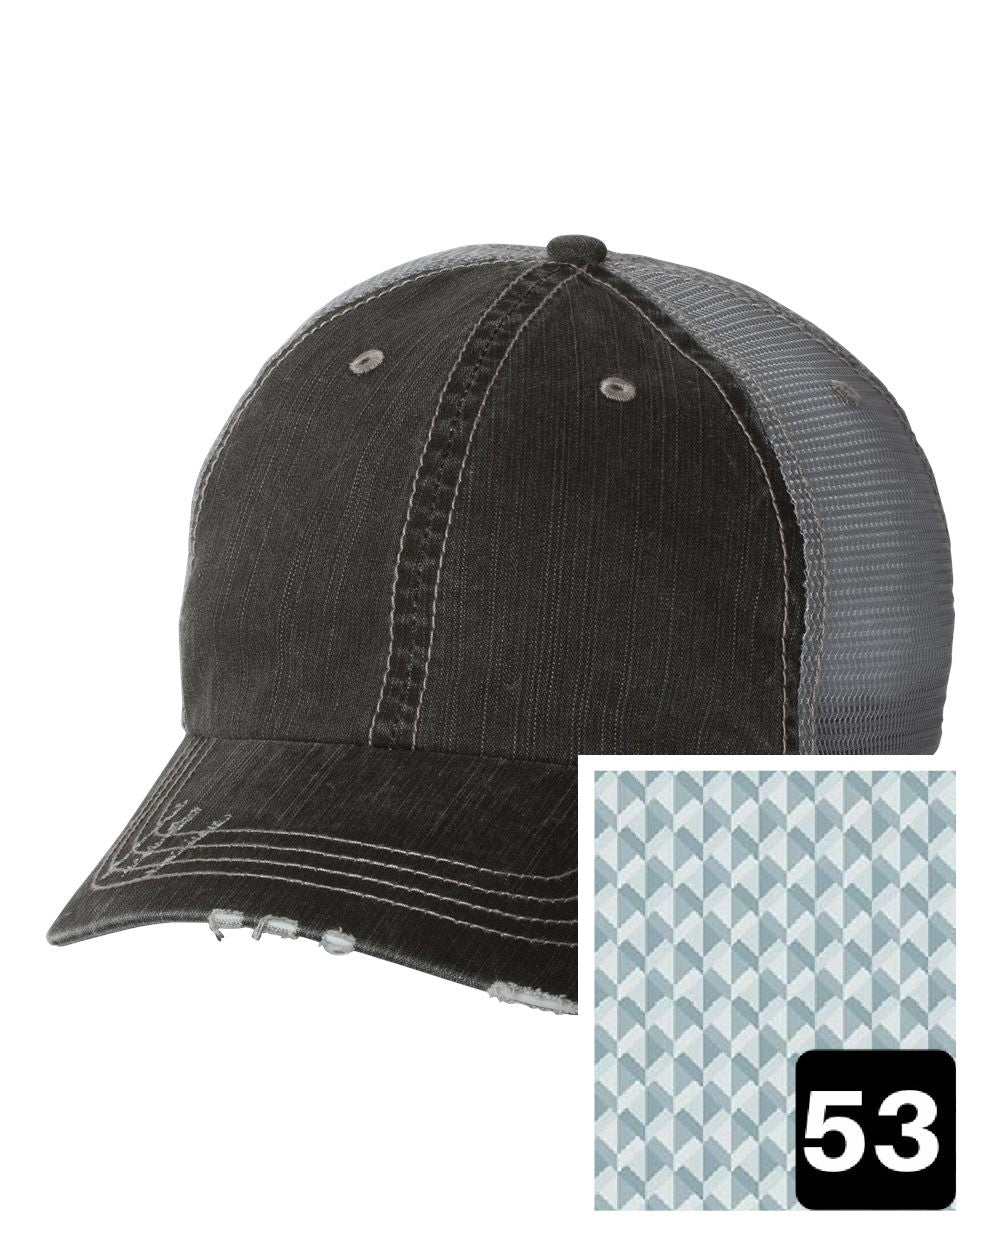 gray distressed trucker hat with multi-color stripe fabric state of Connecticut